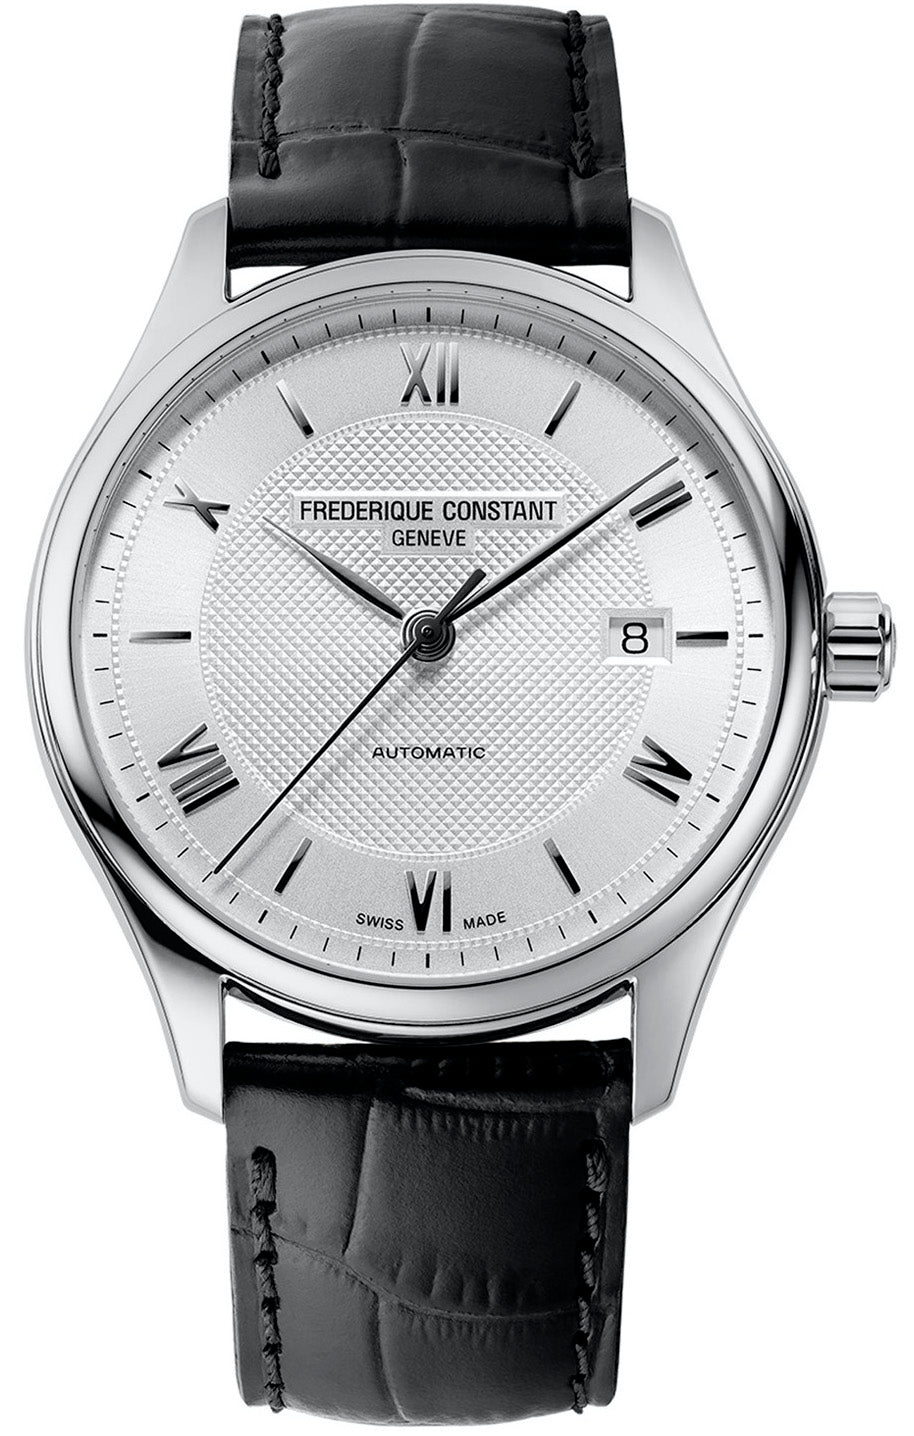 Photos - Wrist Watch Frederique Constant Watch Classic Index Automatic - Silver FDC-434 